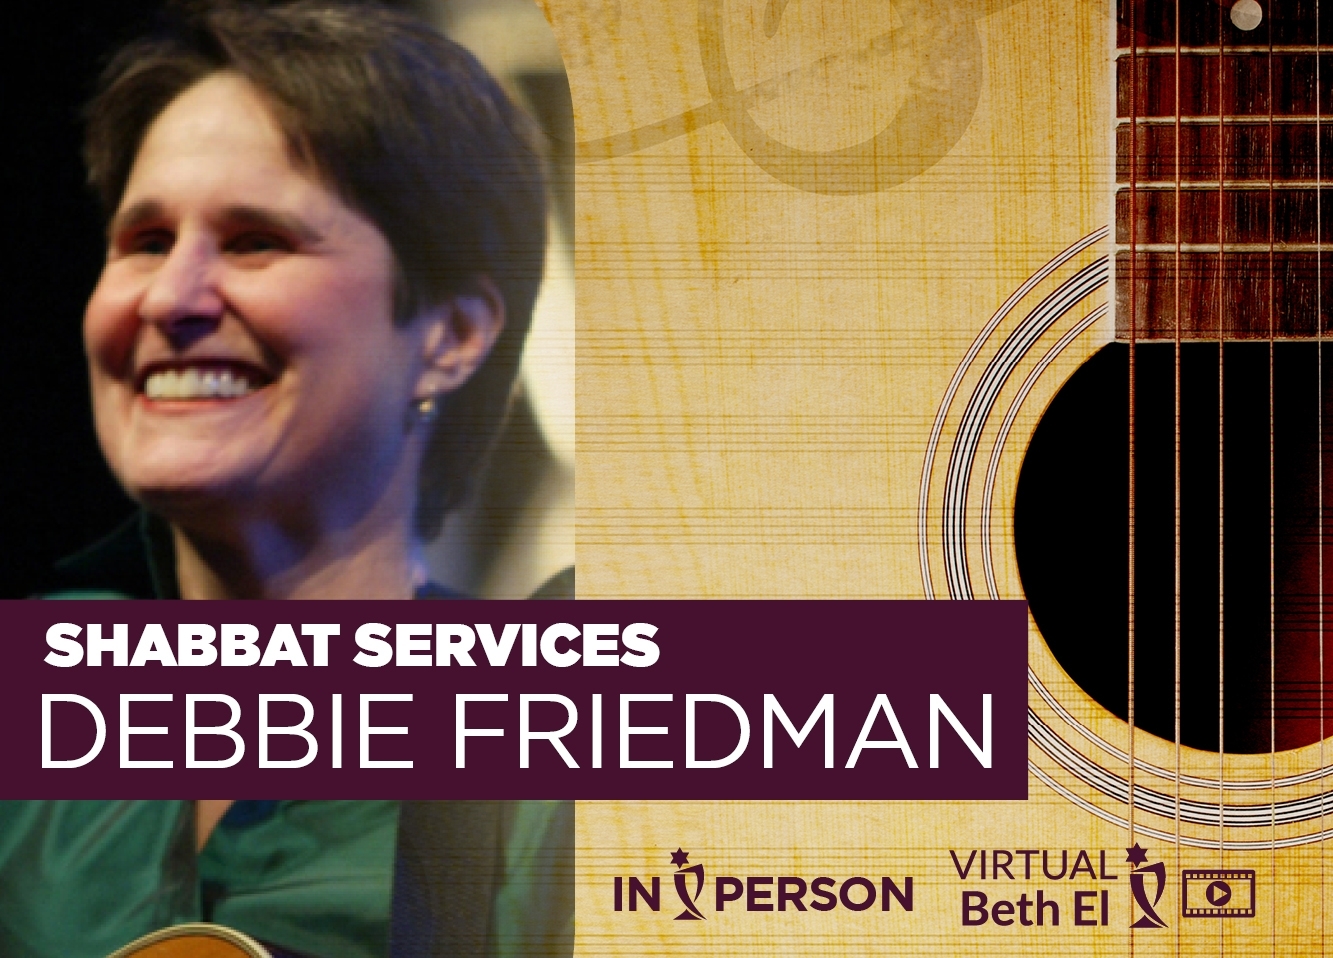 Shabbat Services featuring the Music of Debbie Friedman on her 11th Yarhzeit, Temple Beth El of Boca Raton event graphic